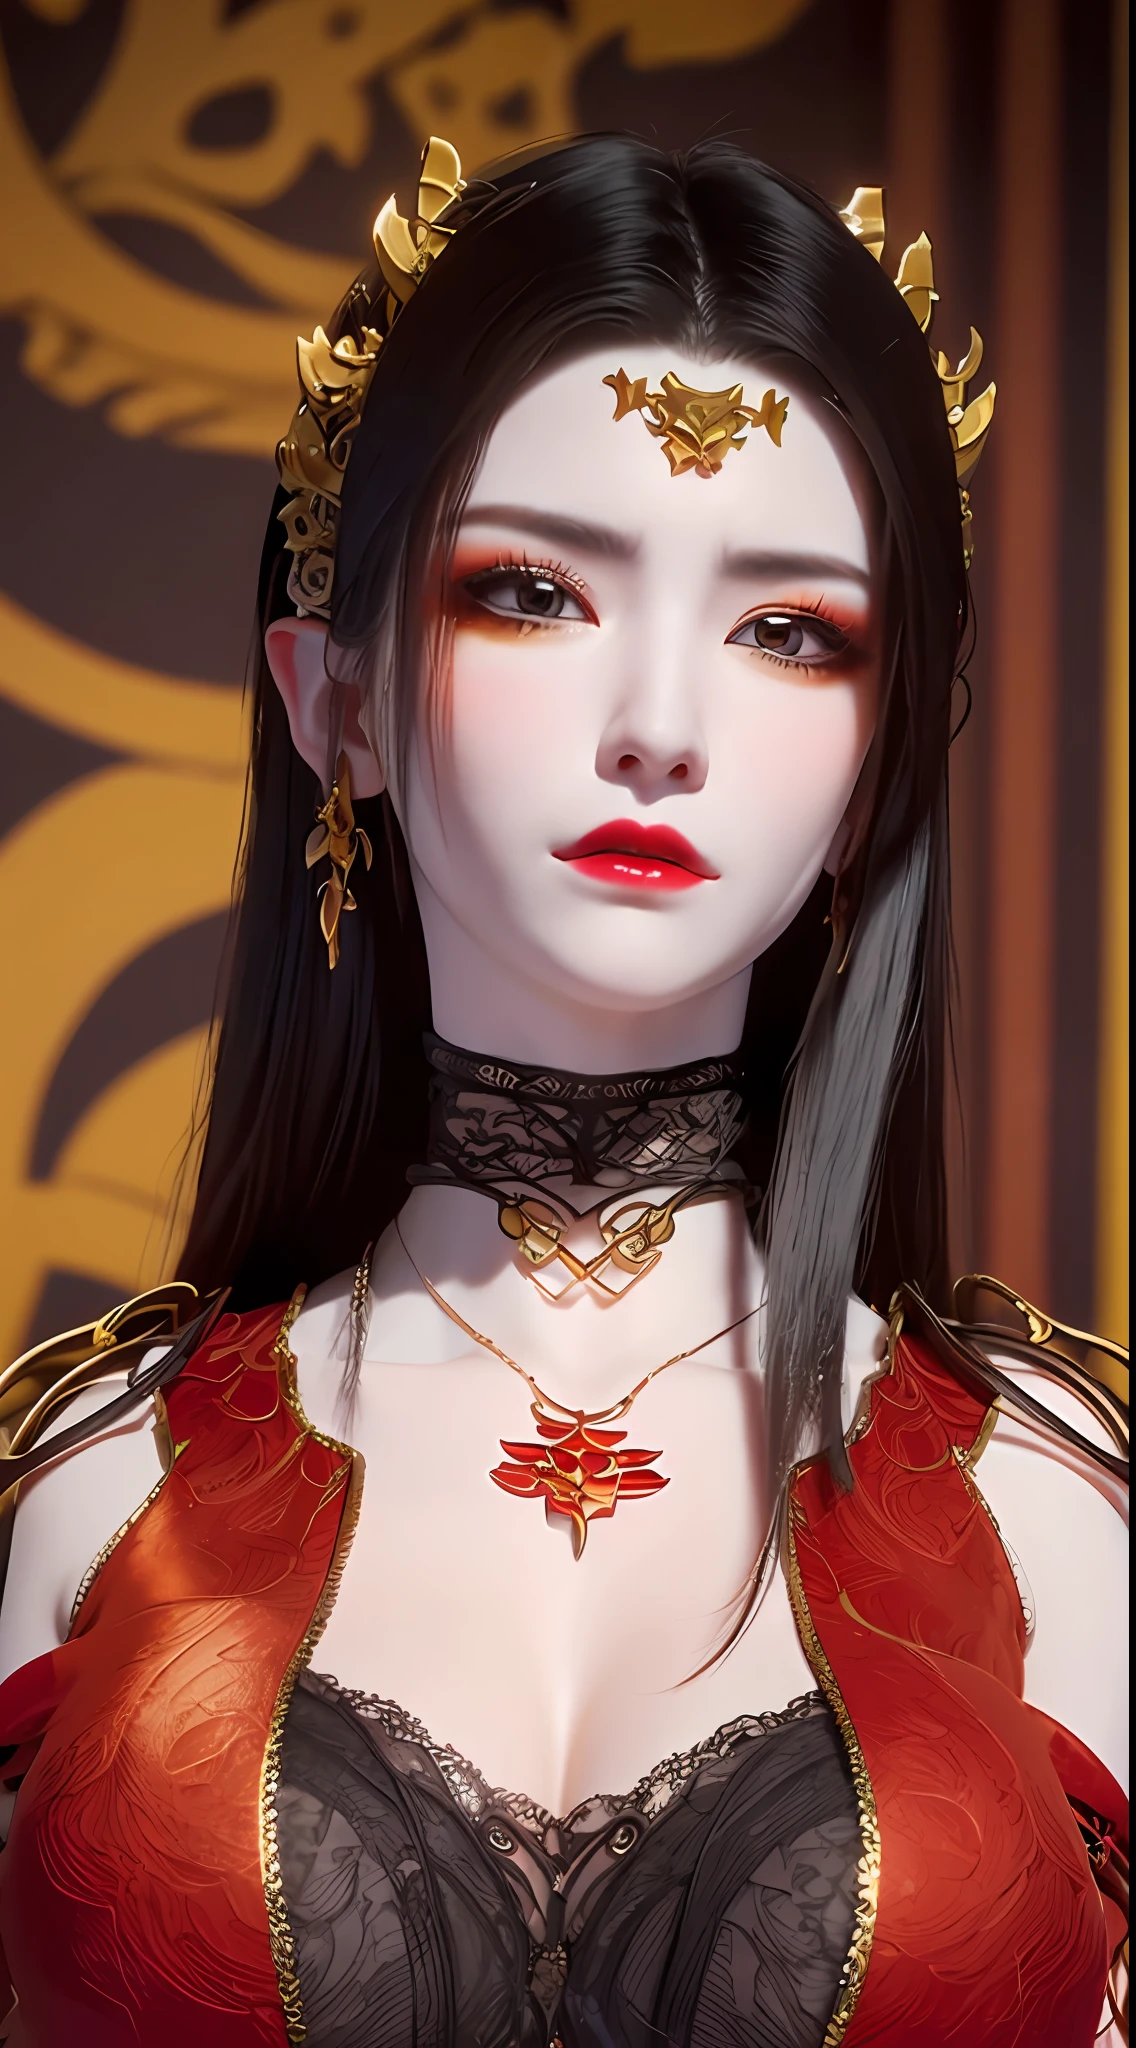 1 very beautiful queen medusha in hanfu dress, thin red silk shirt with many yellow motifs, black lace top, long hair dyed black, beautiful hair jewelry, pretty face pretty, perfect face, earring jewelry, head and hair jewelry, antique jewelry, big red eyes, sharp eye makeup, meticulous makeup eyelashes, thin eyebrows, nose tall, pretty red lips, no smile, ((closed mouth:0.9)), pursed lips, rosy cheeks, breast augmentation, wide breasts, big breasts, well-proportioned breasts, slim waist, slim waist, red mesh stockings with black lace, Chinese hanfu style, fictional art patterns, colors vivid and realistic, RAW photos, realistic photos, ultra-high quality 8k surreal photos, cool photos, (virtual lighting effects: 1.8), 10x pixels, magic effects (background): 1.8), eyes wide open, super detailed eyes, beautiful girl body portrait, girl alone, ancient hanfu background, looking directly at the audience, wide original photo, 8k quality, super sharp, detailed and clear picture best, detailed light background,